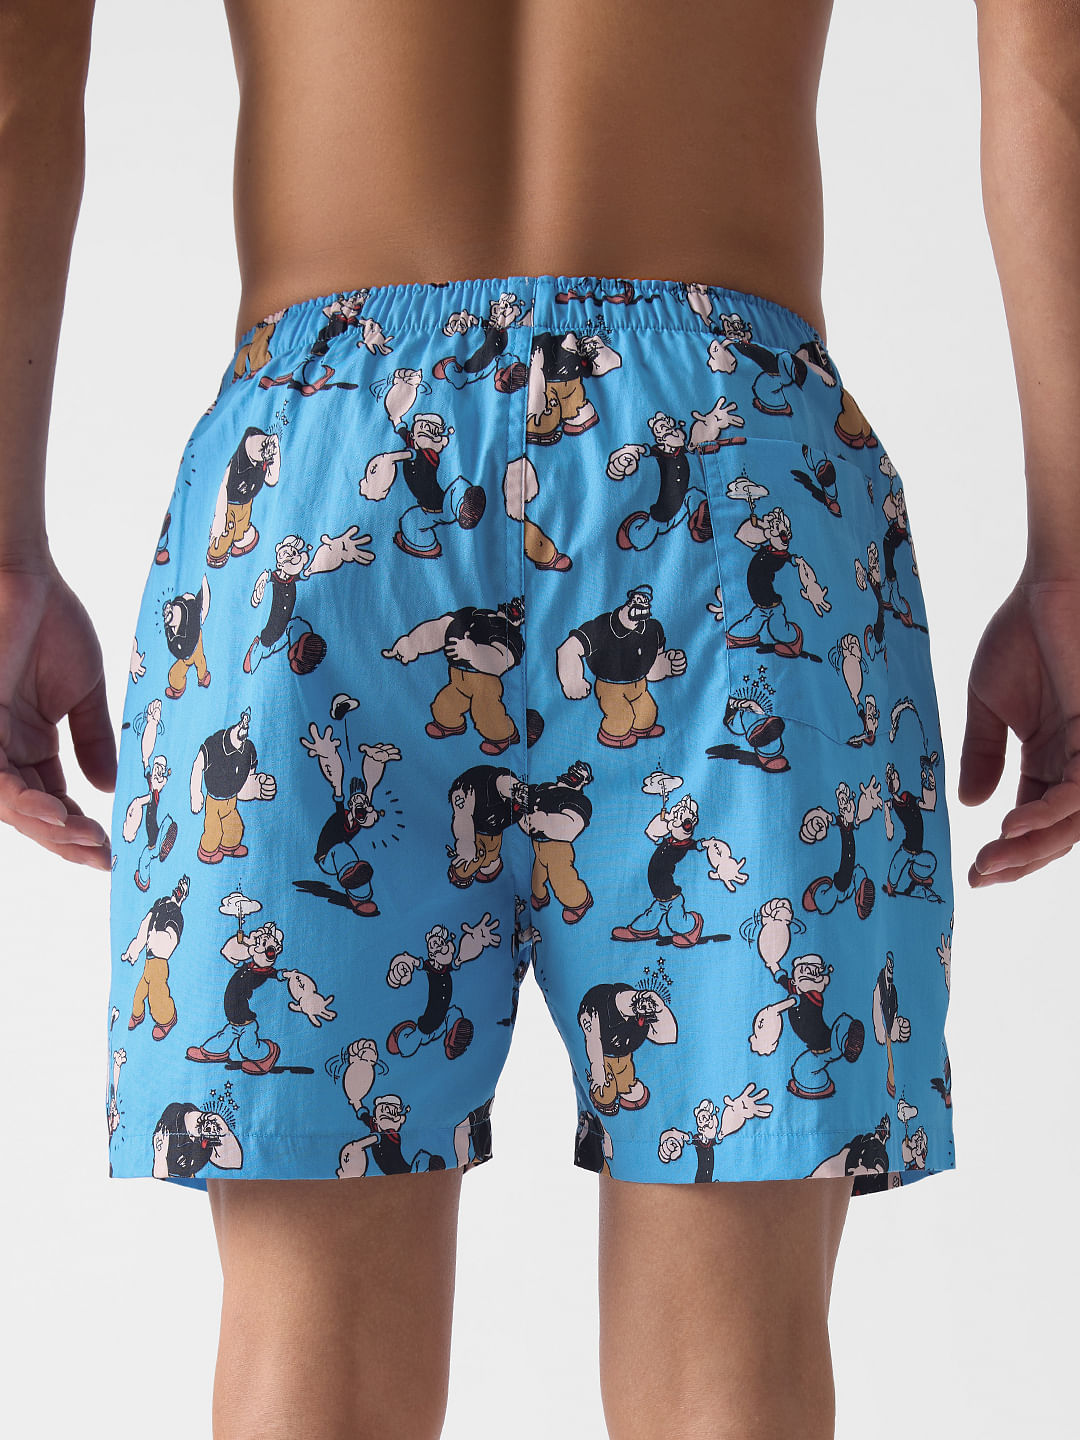 Buy Official Popeye: Pattern Boxer Shorts Online